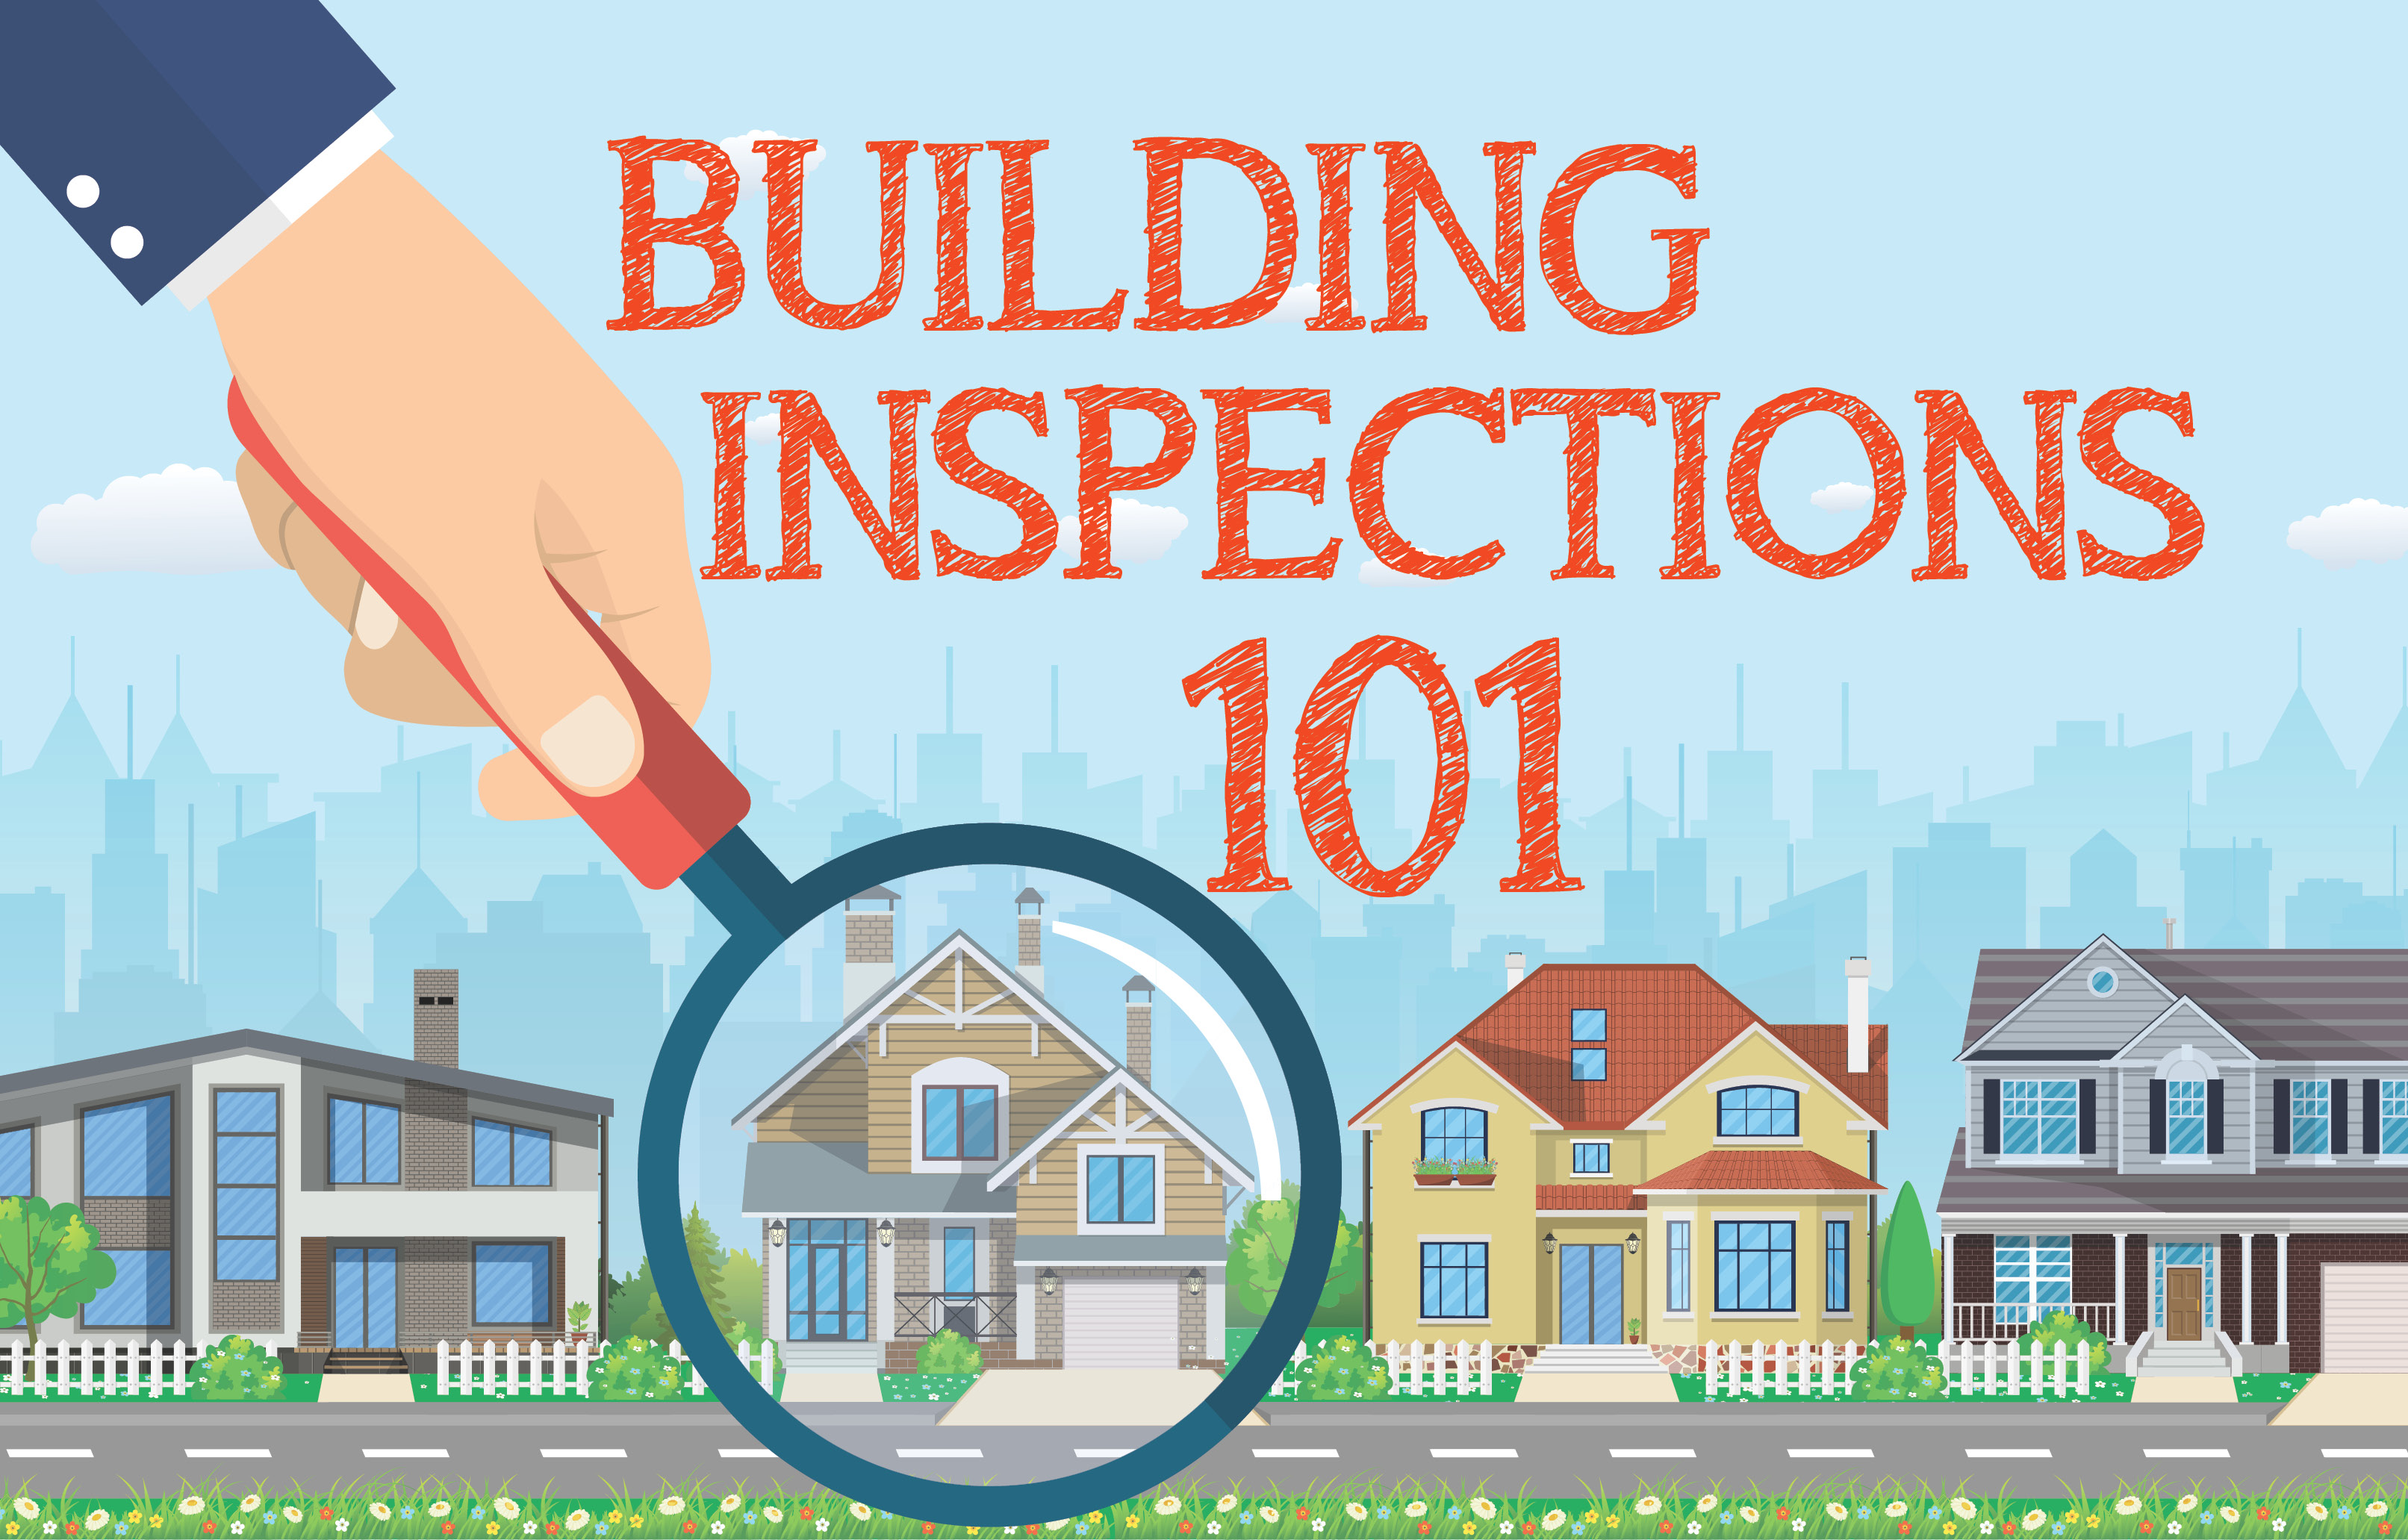 BUILDING INSPECTIONS 101